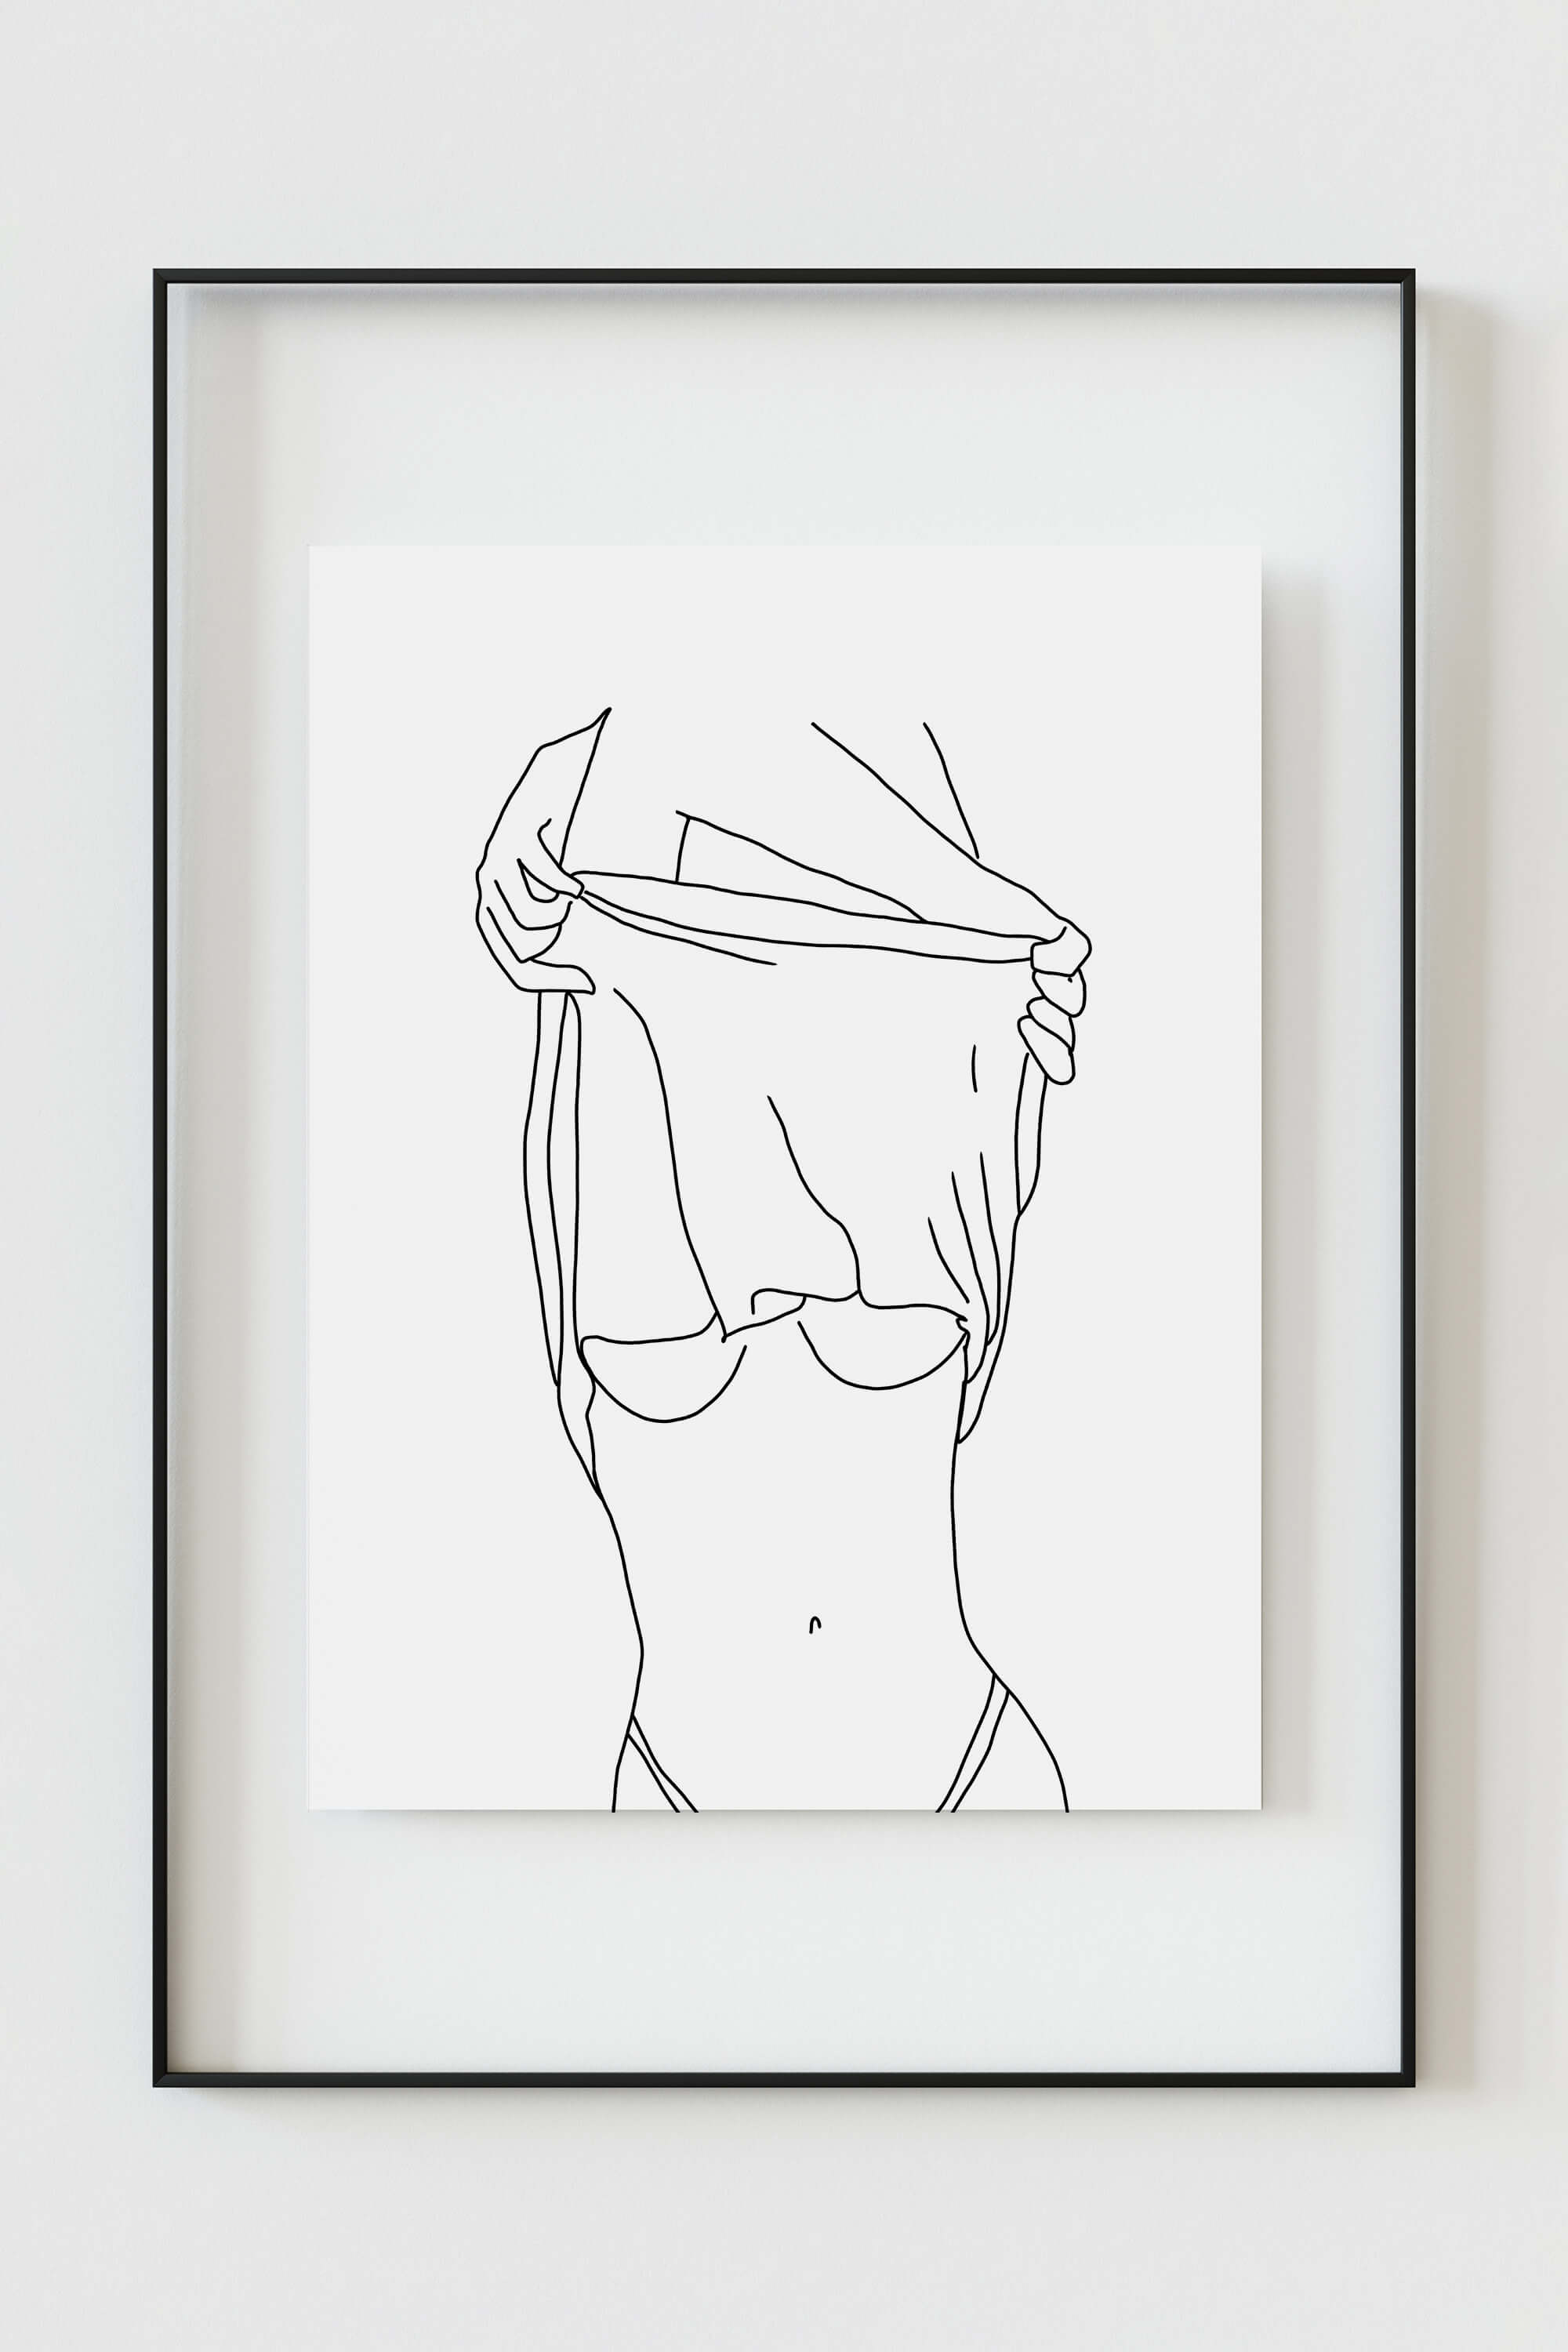 Exquisite art print capturing the sensuality of the female form. Delicate lines evoke grace and movement, creating a sophisticated and alluring atmosphere. Ideal for those seeking a touch of sensuality in their decor.